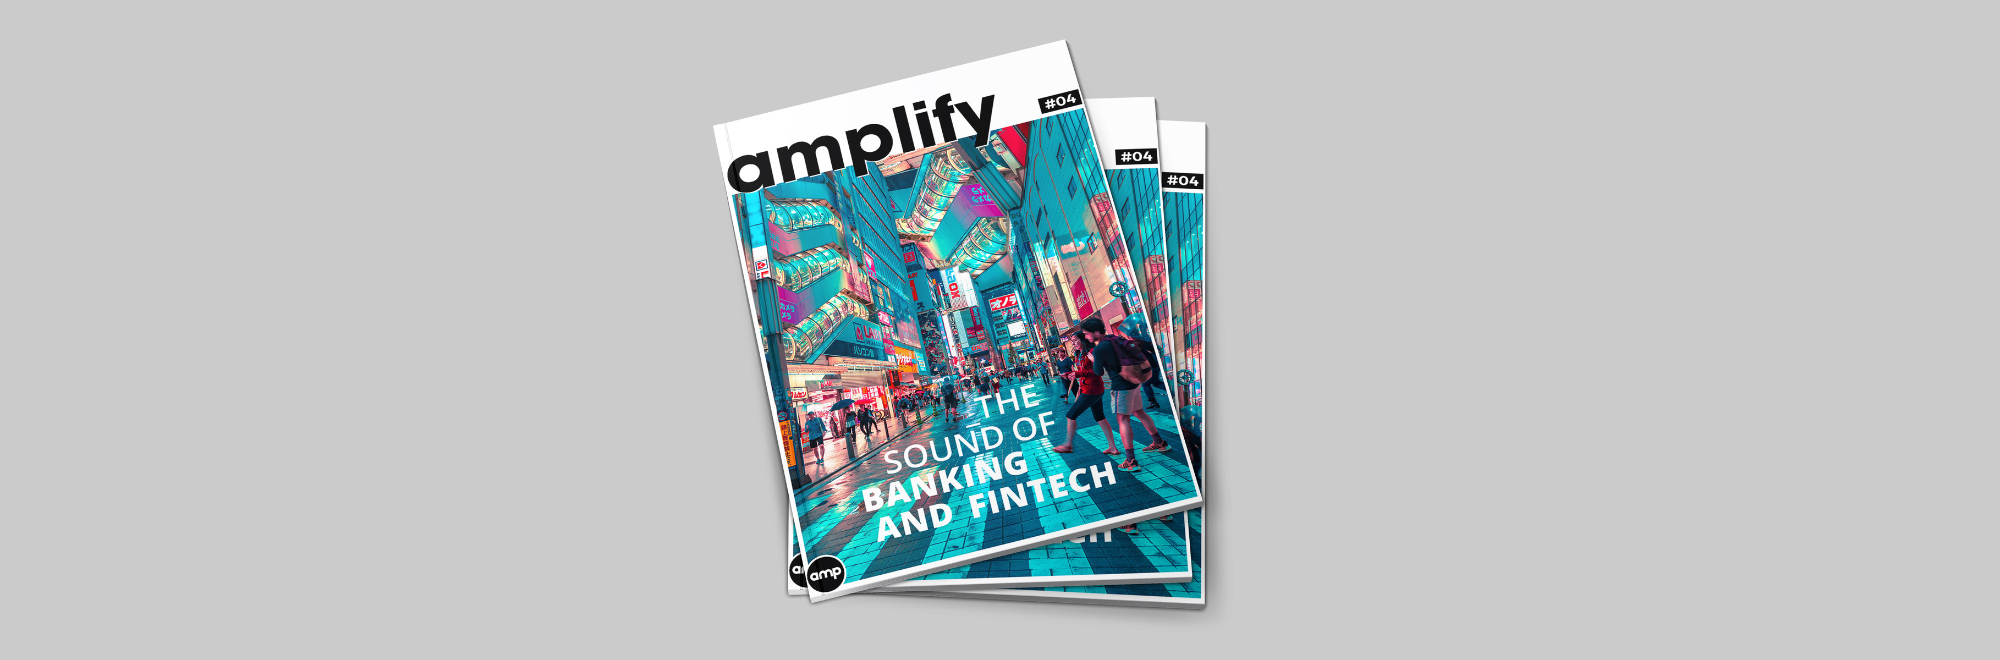 Highlights from Amp's new publication, amplify: "The Sound of Banking & FinTech"